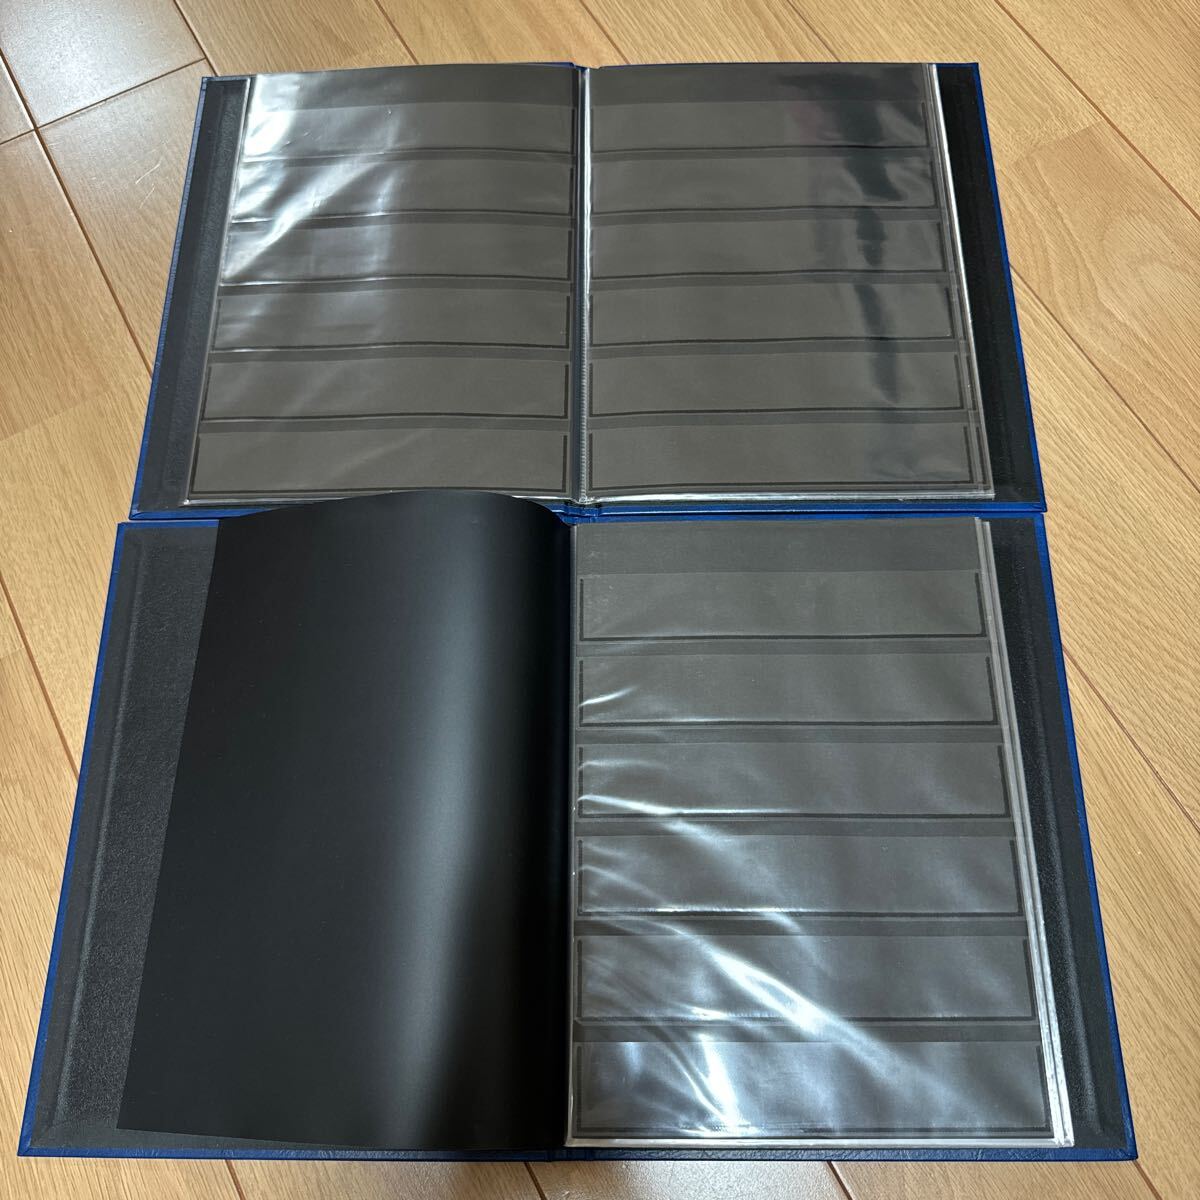  stock book Stamp Album BTypete-ji-SB-30N stamp album blue 3 pcs. summarize case attaching length some 27cm width some 20.3cm cardboard 8 sheets 16 page 6 step 